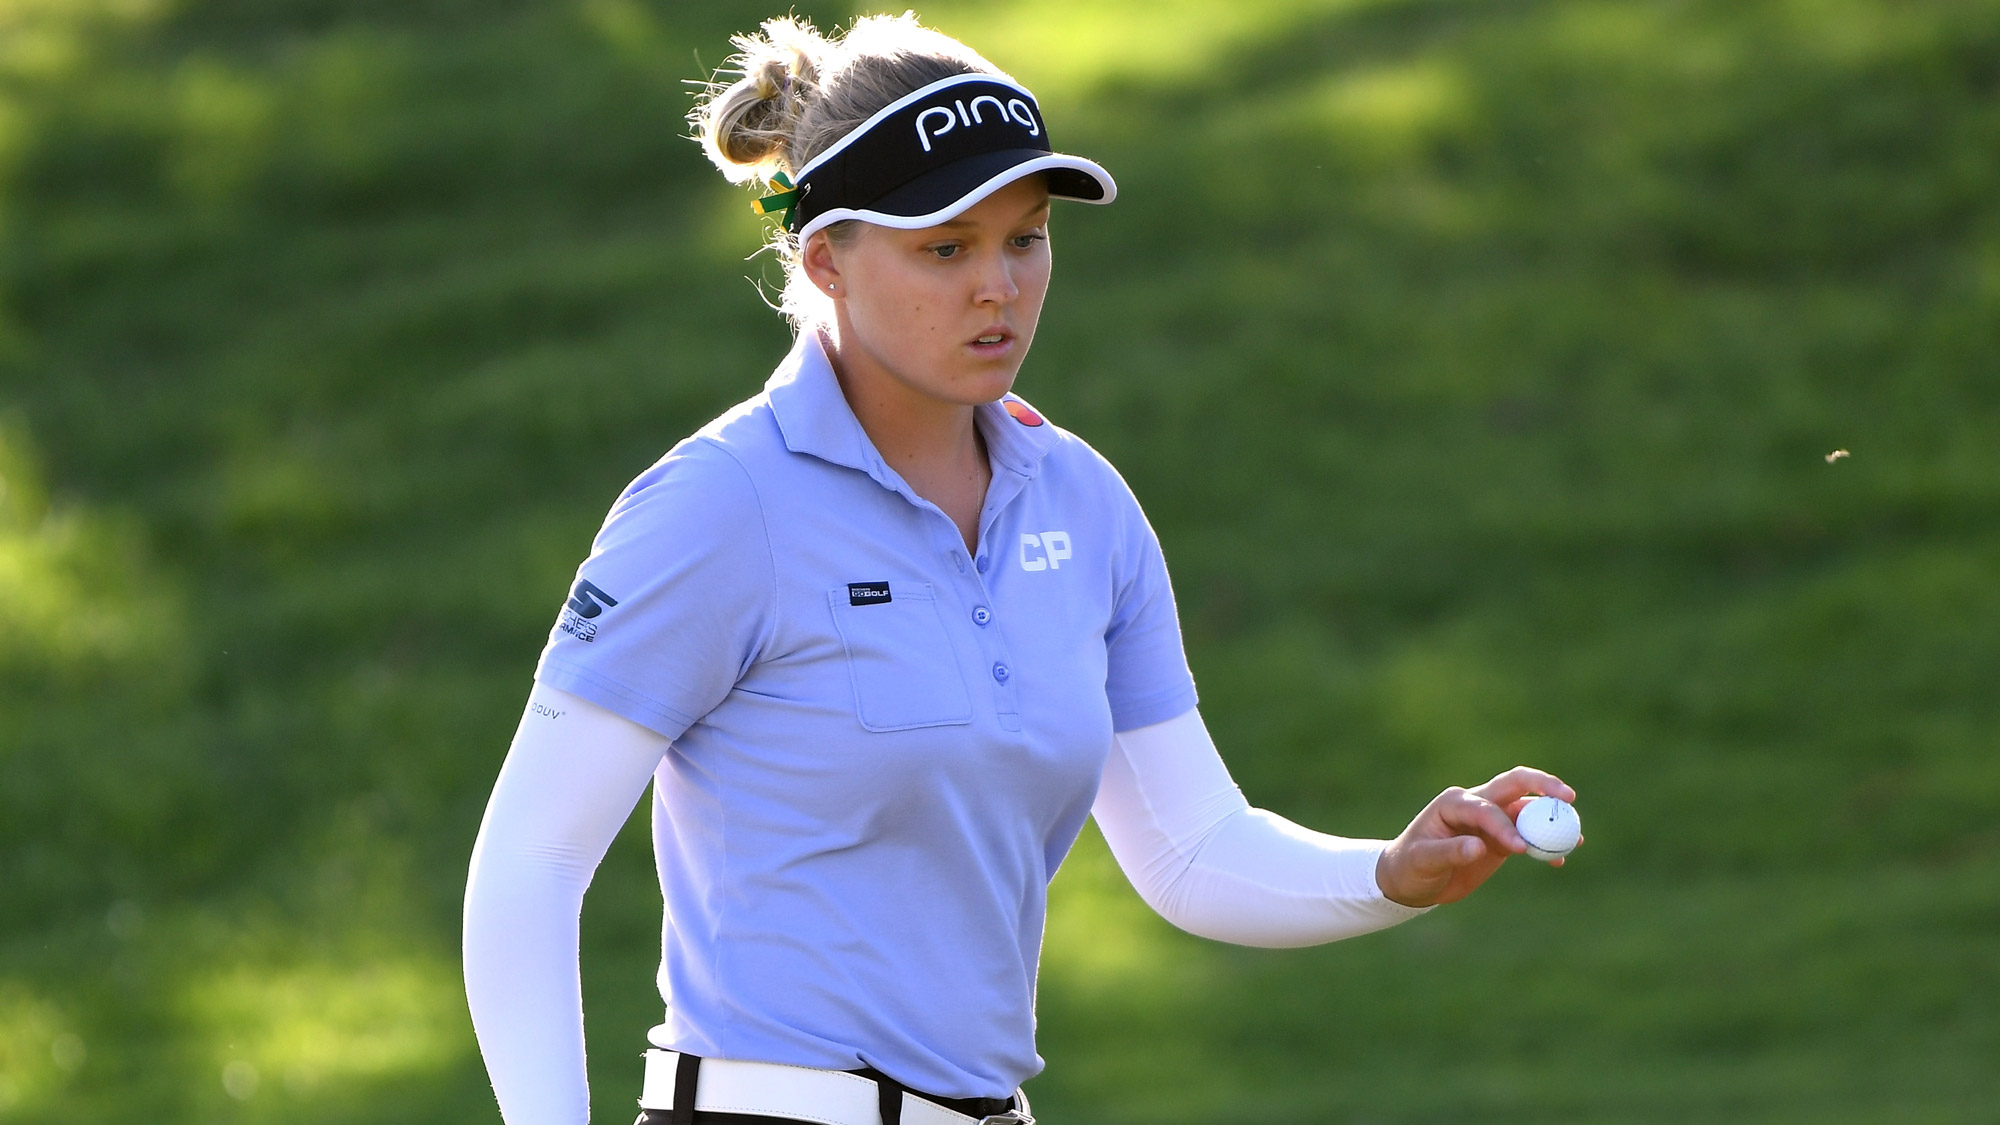 Brooke Henderson After Finishing a Putt in Hawaii